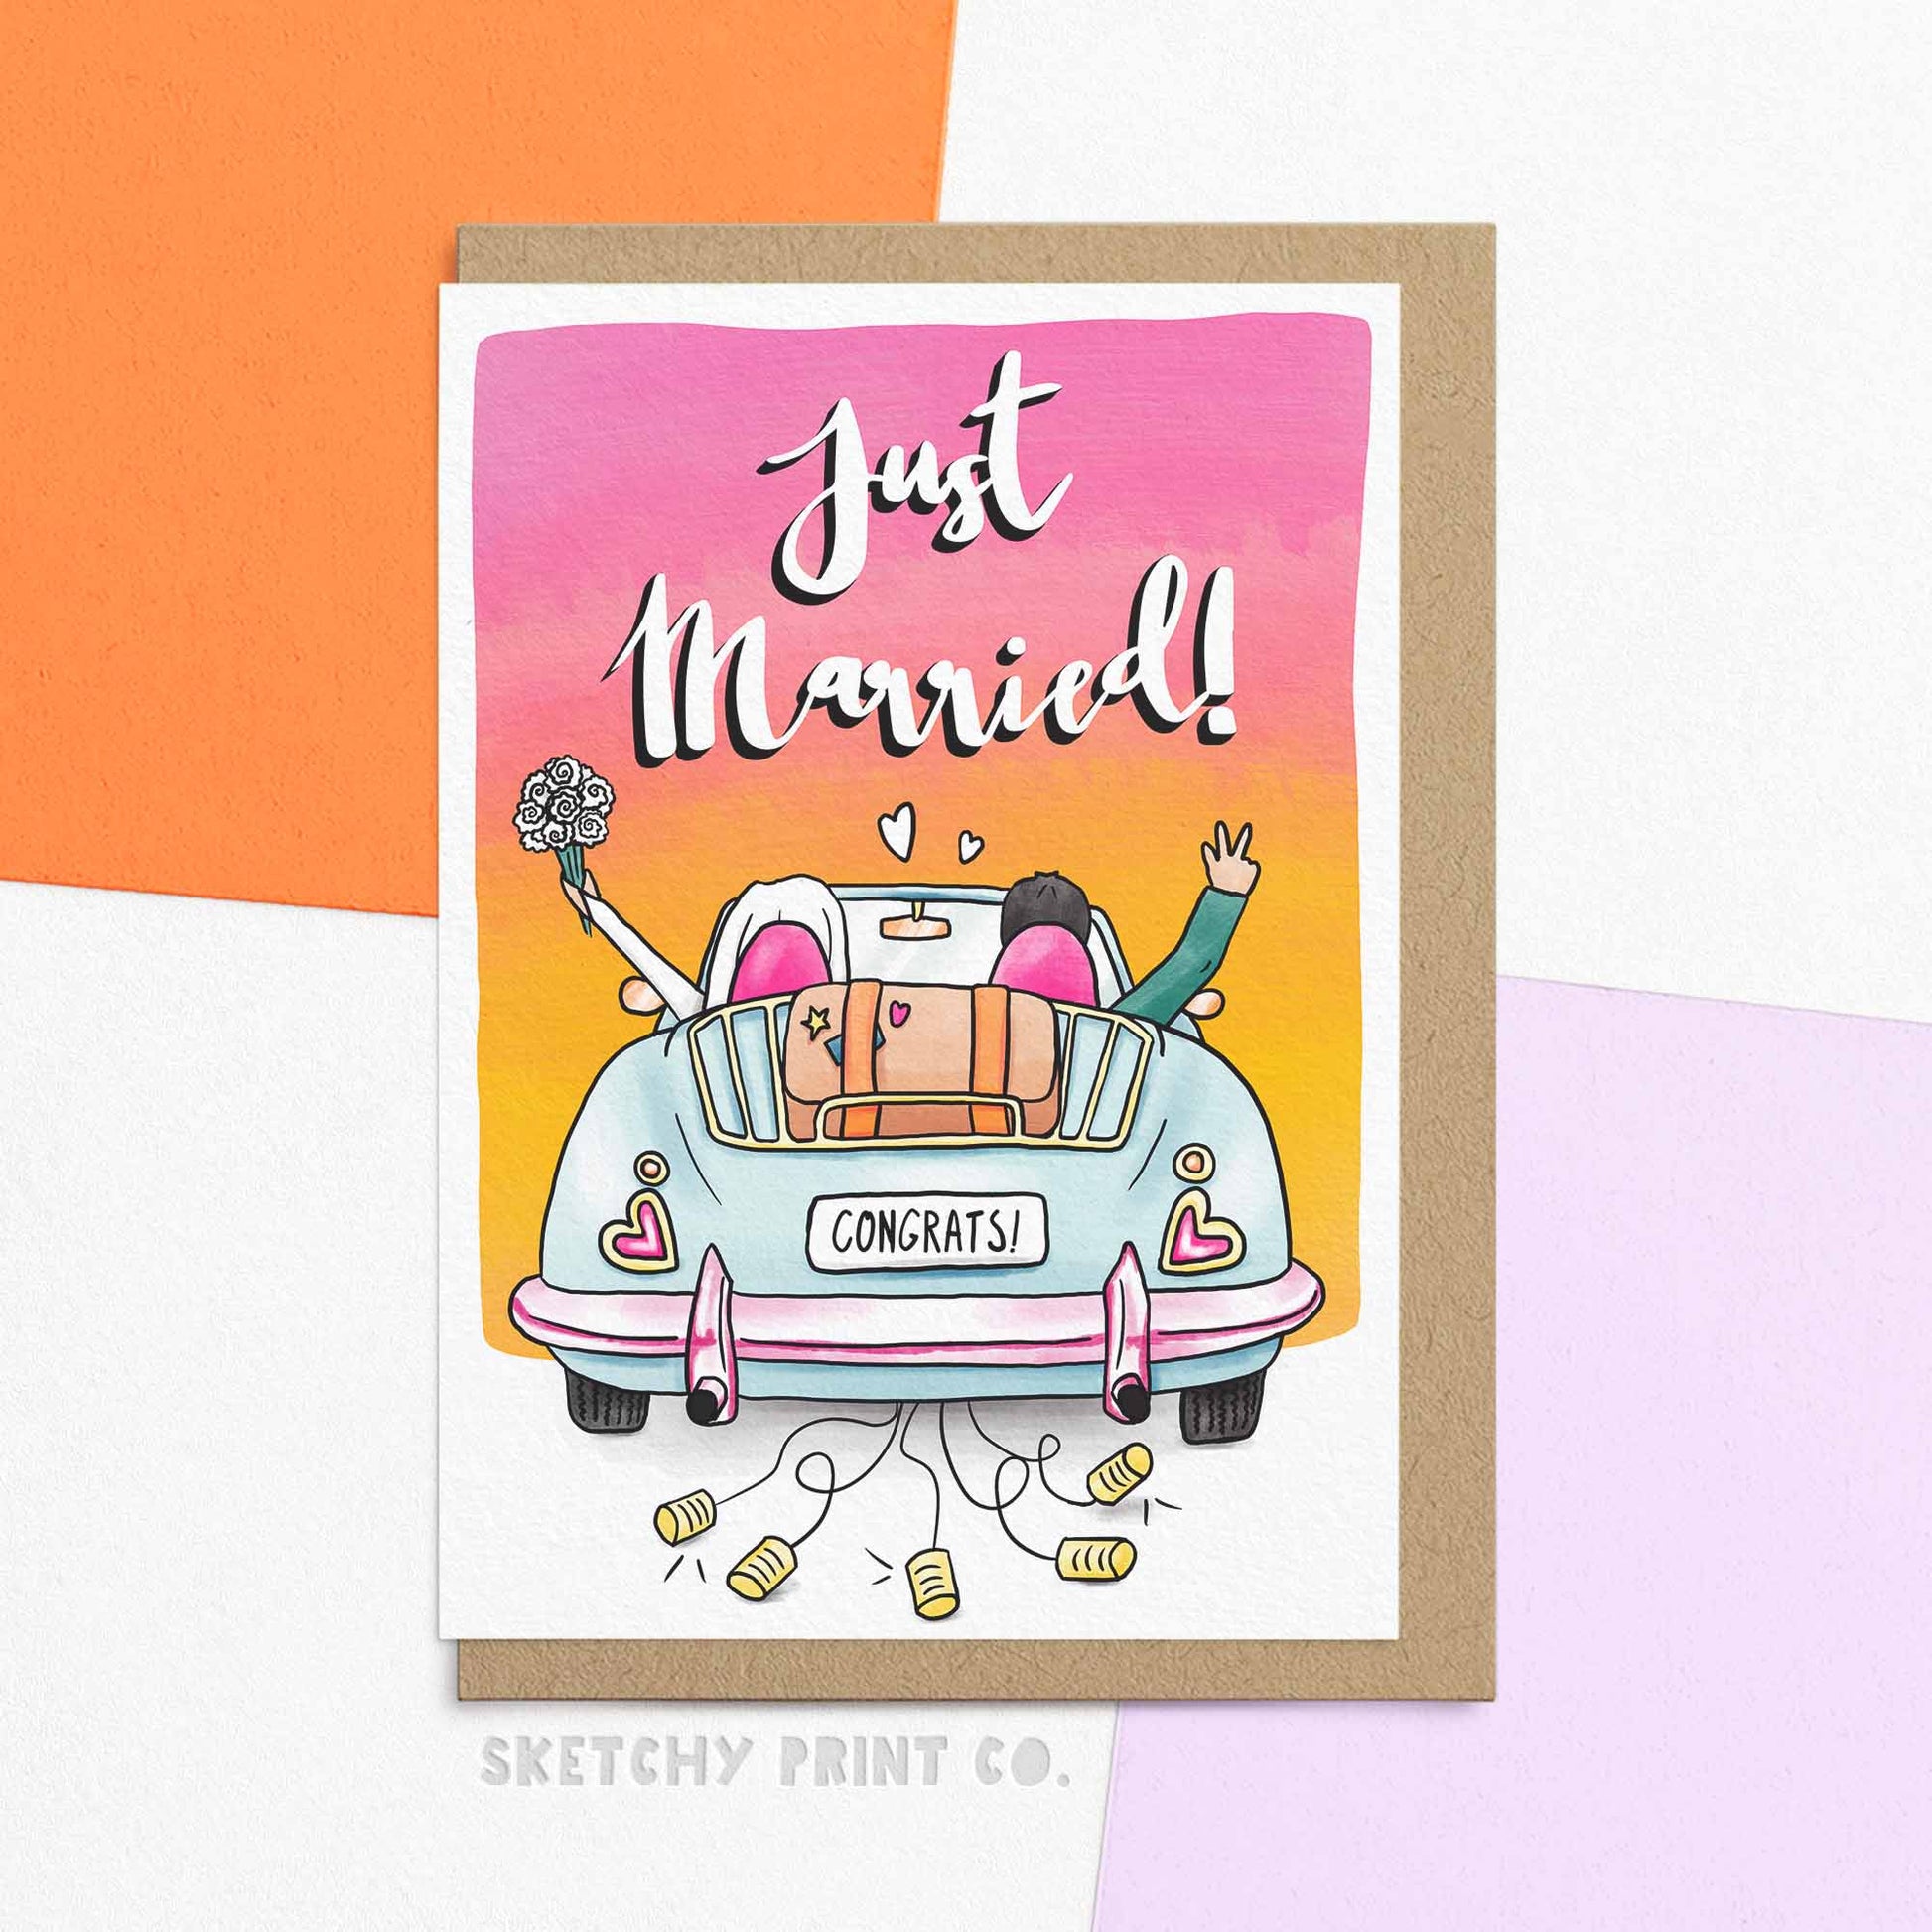 This modern wedding card features an illustration of the wedding couple in a vintage car driving into their happily ever after, the prefect way to congratulate your friend on your son's or daughter's wedding too! Wedding Day Greetings For Newly Wed Couple. Send the newly wed couple off into the sunset with our wedding day greetings card! Make their marriage day special with our colourful design, it's the perfect way to wish your friends 'congratulations on your wedding!'. 